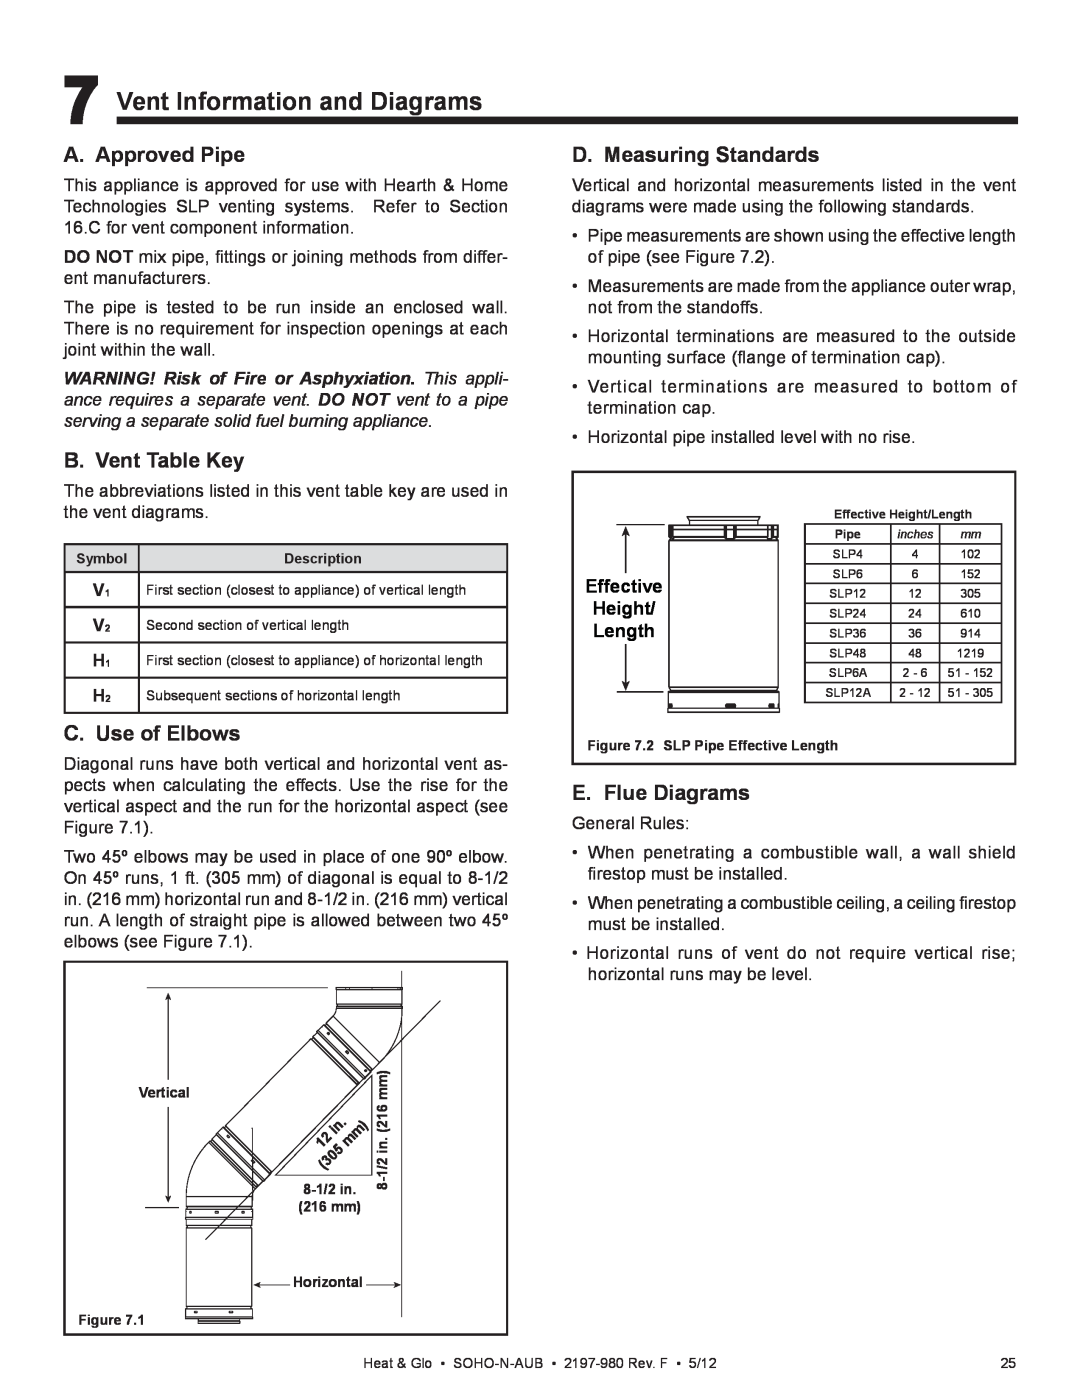 Heat & Glo LifeStyle 2197-980 Vent Information and Diagrams, A. Approved Pipe, B. Vent Table Key, C. Use of Elbows 